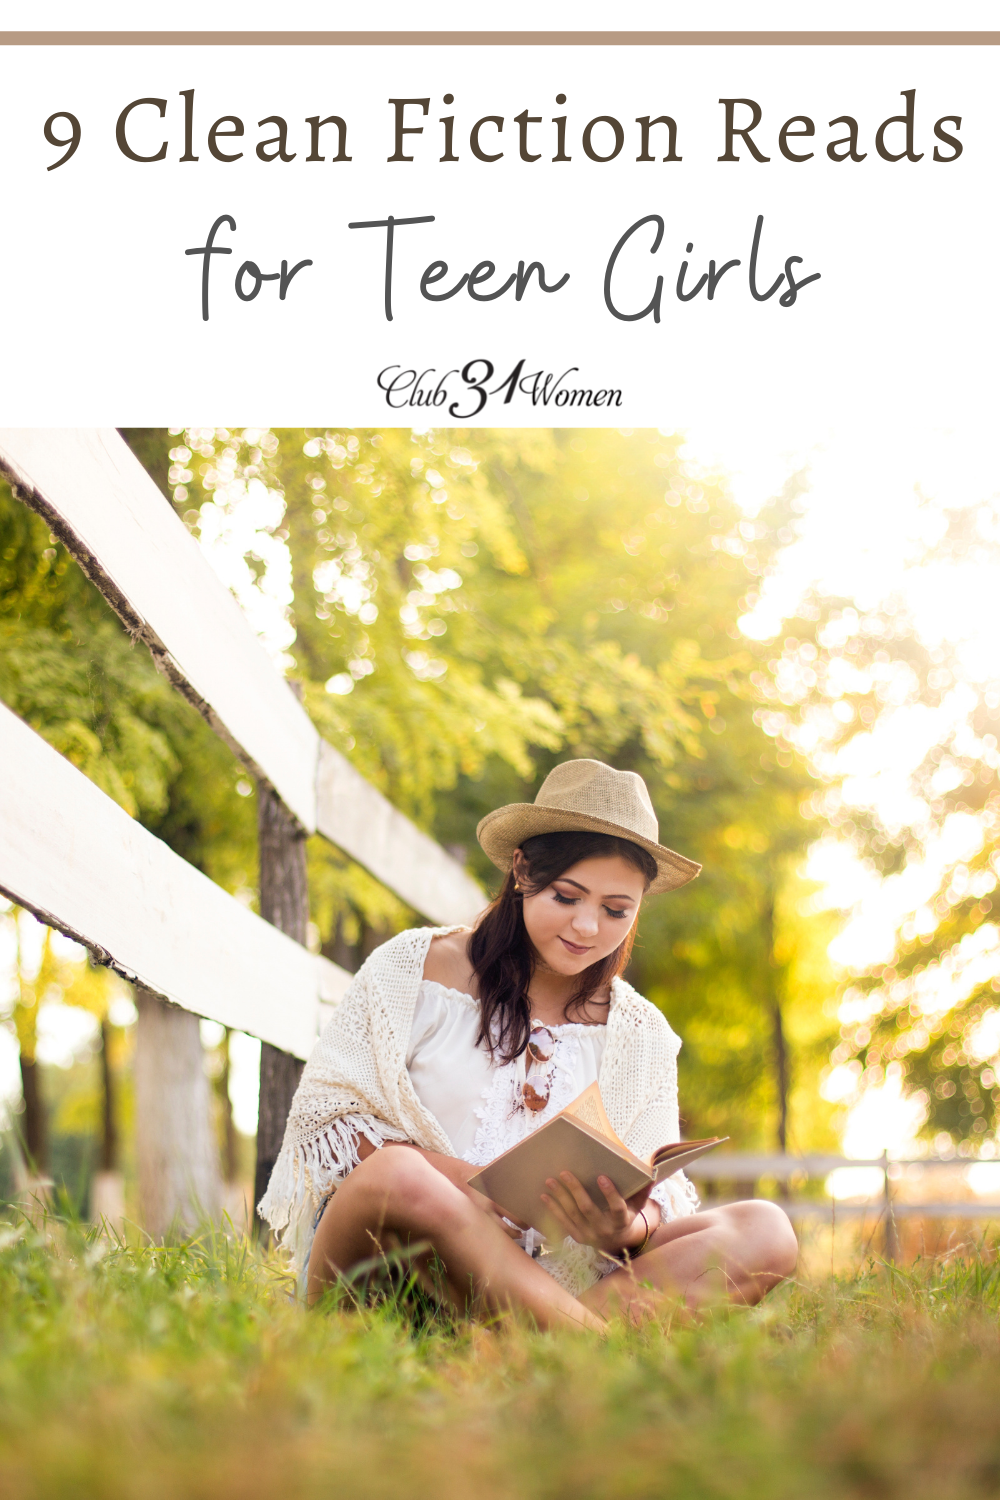 It can be difficult to find good, clean fiction reads for teen girls today. We hope this list will get you started in the right direction. via @Club31Women